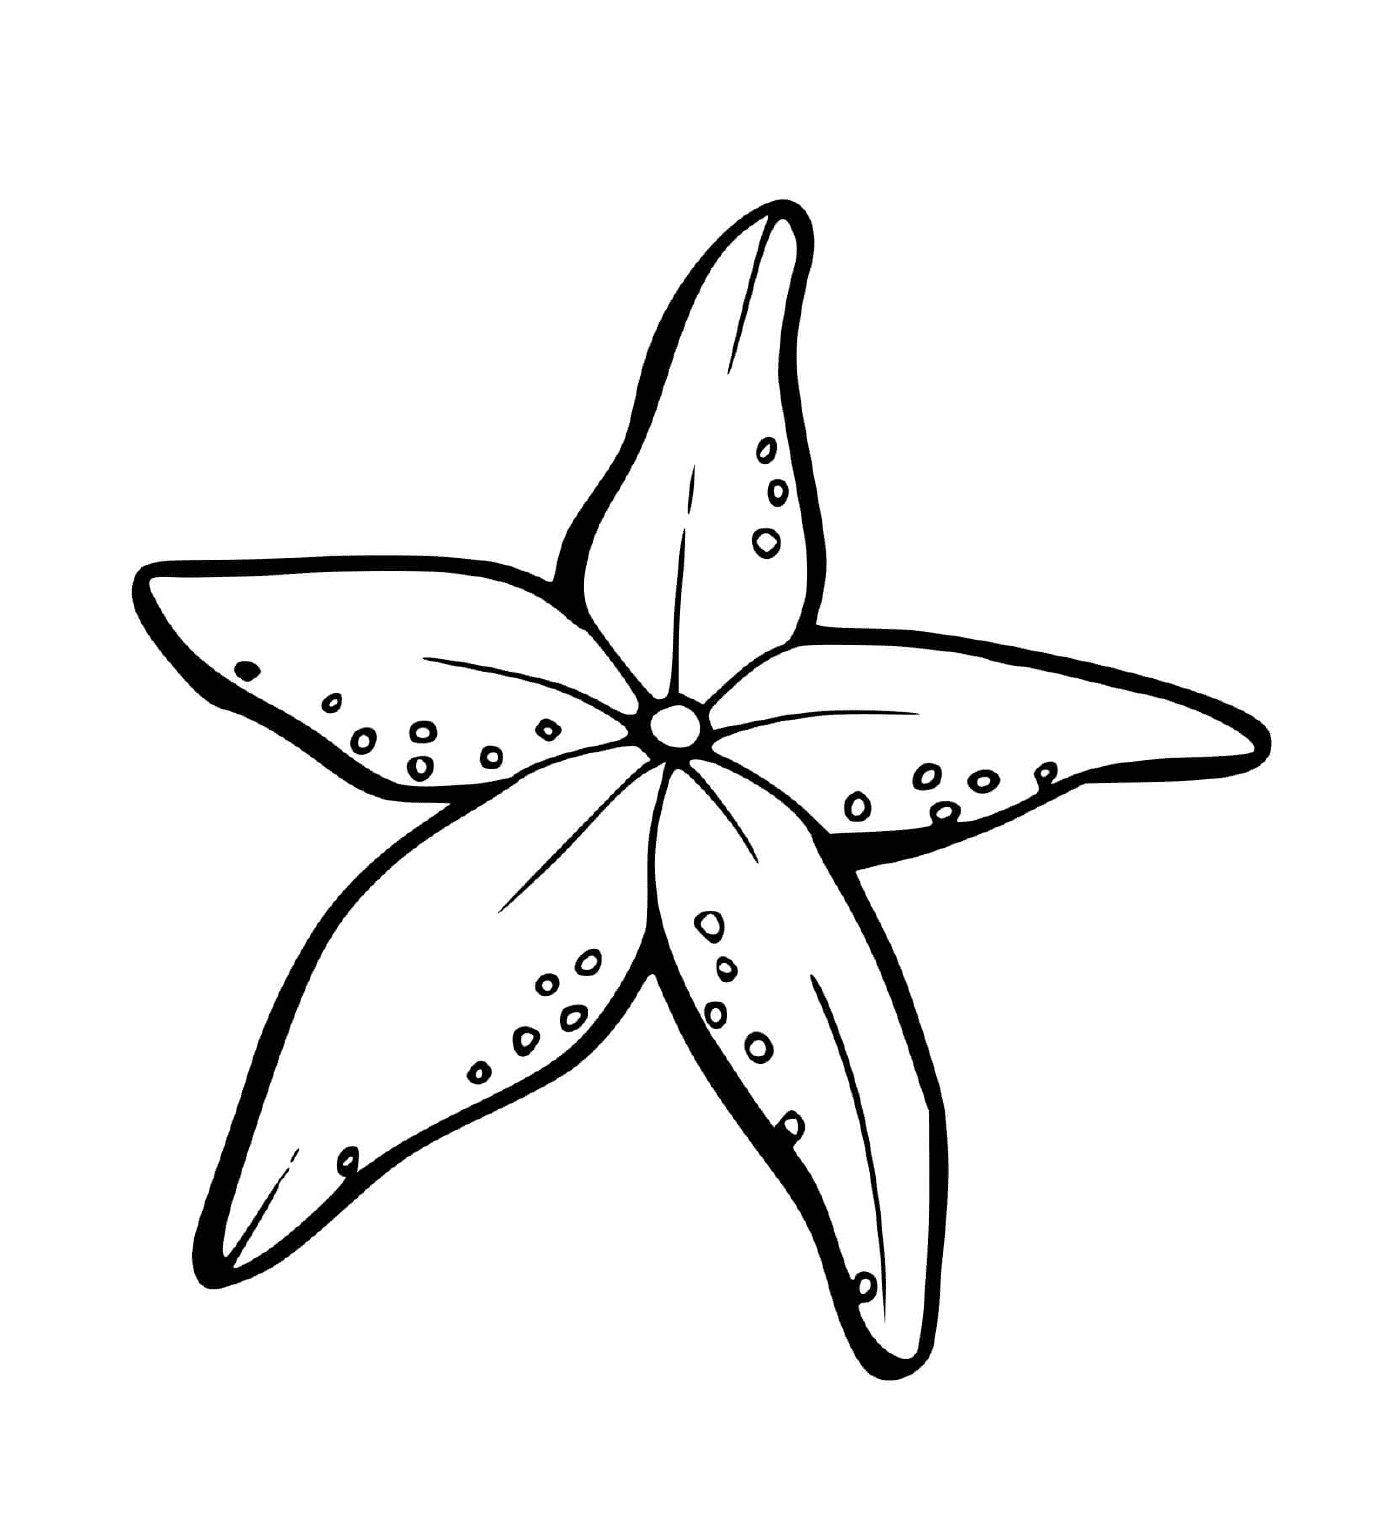  A star of the sea in the shape of flowers 